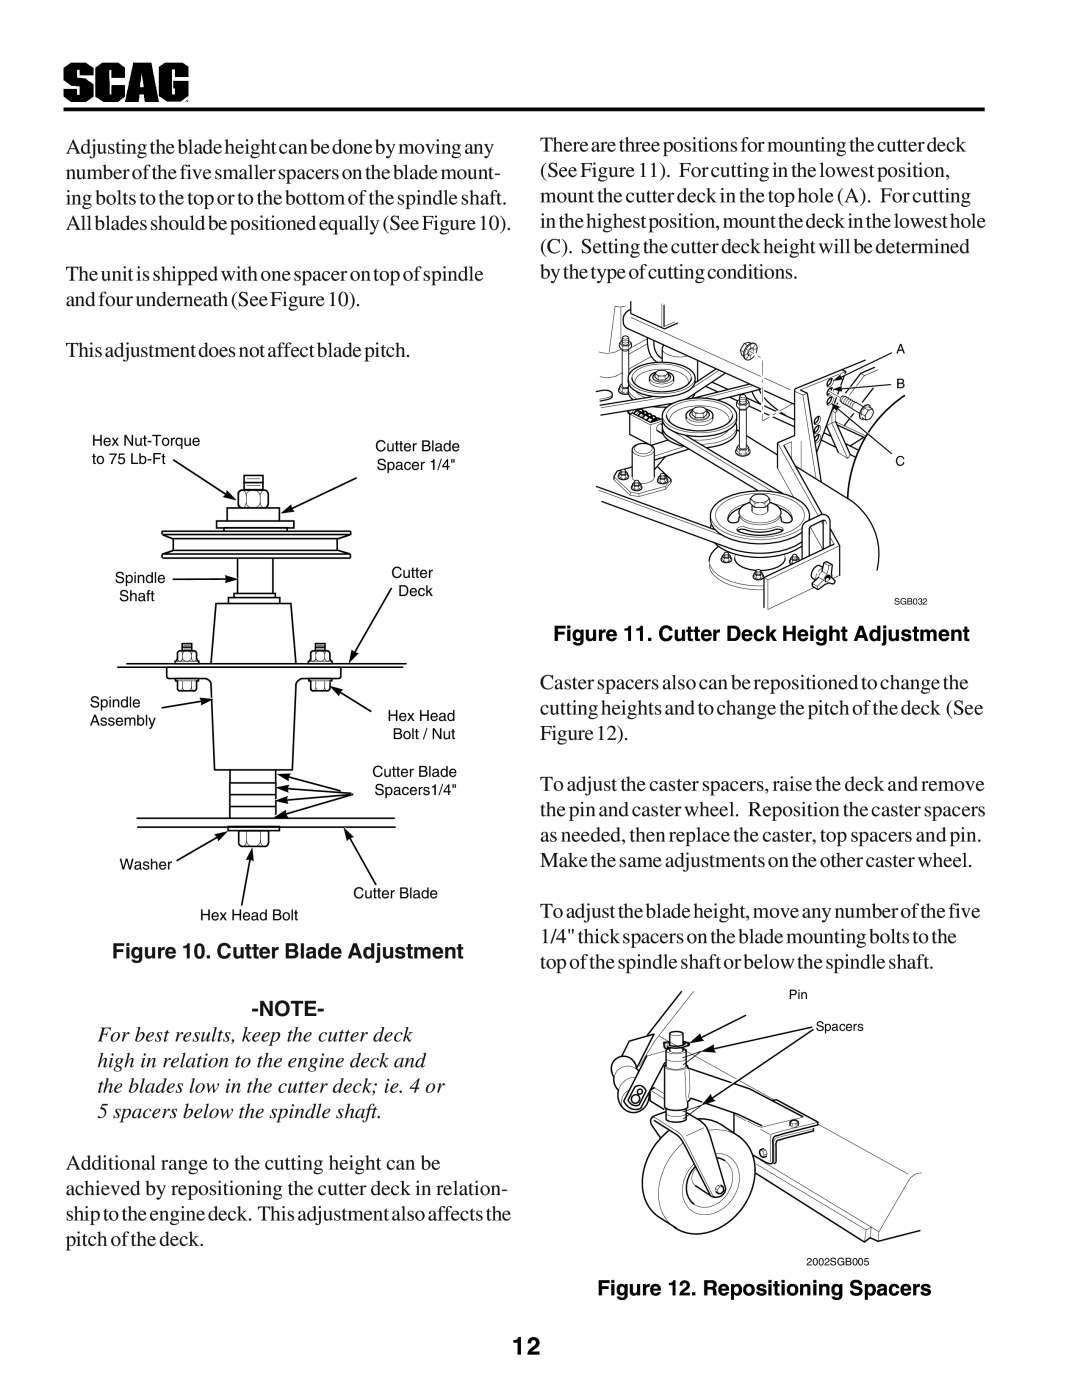 Scag Power Equipment STHM manual Cutter Blade Adjustment, Cutter Deck Height Adjustment, Repositioning Spacers 